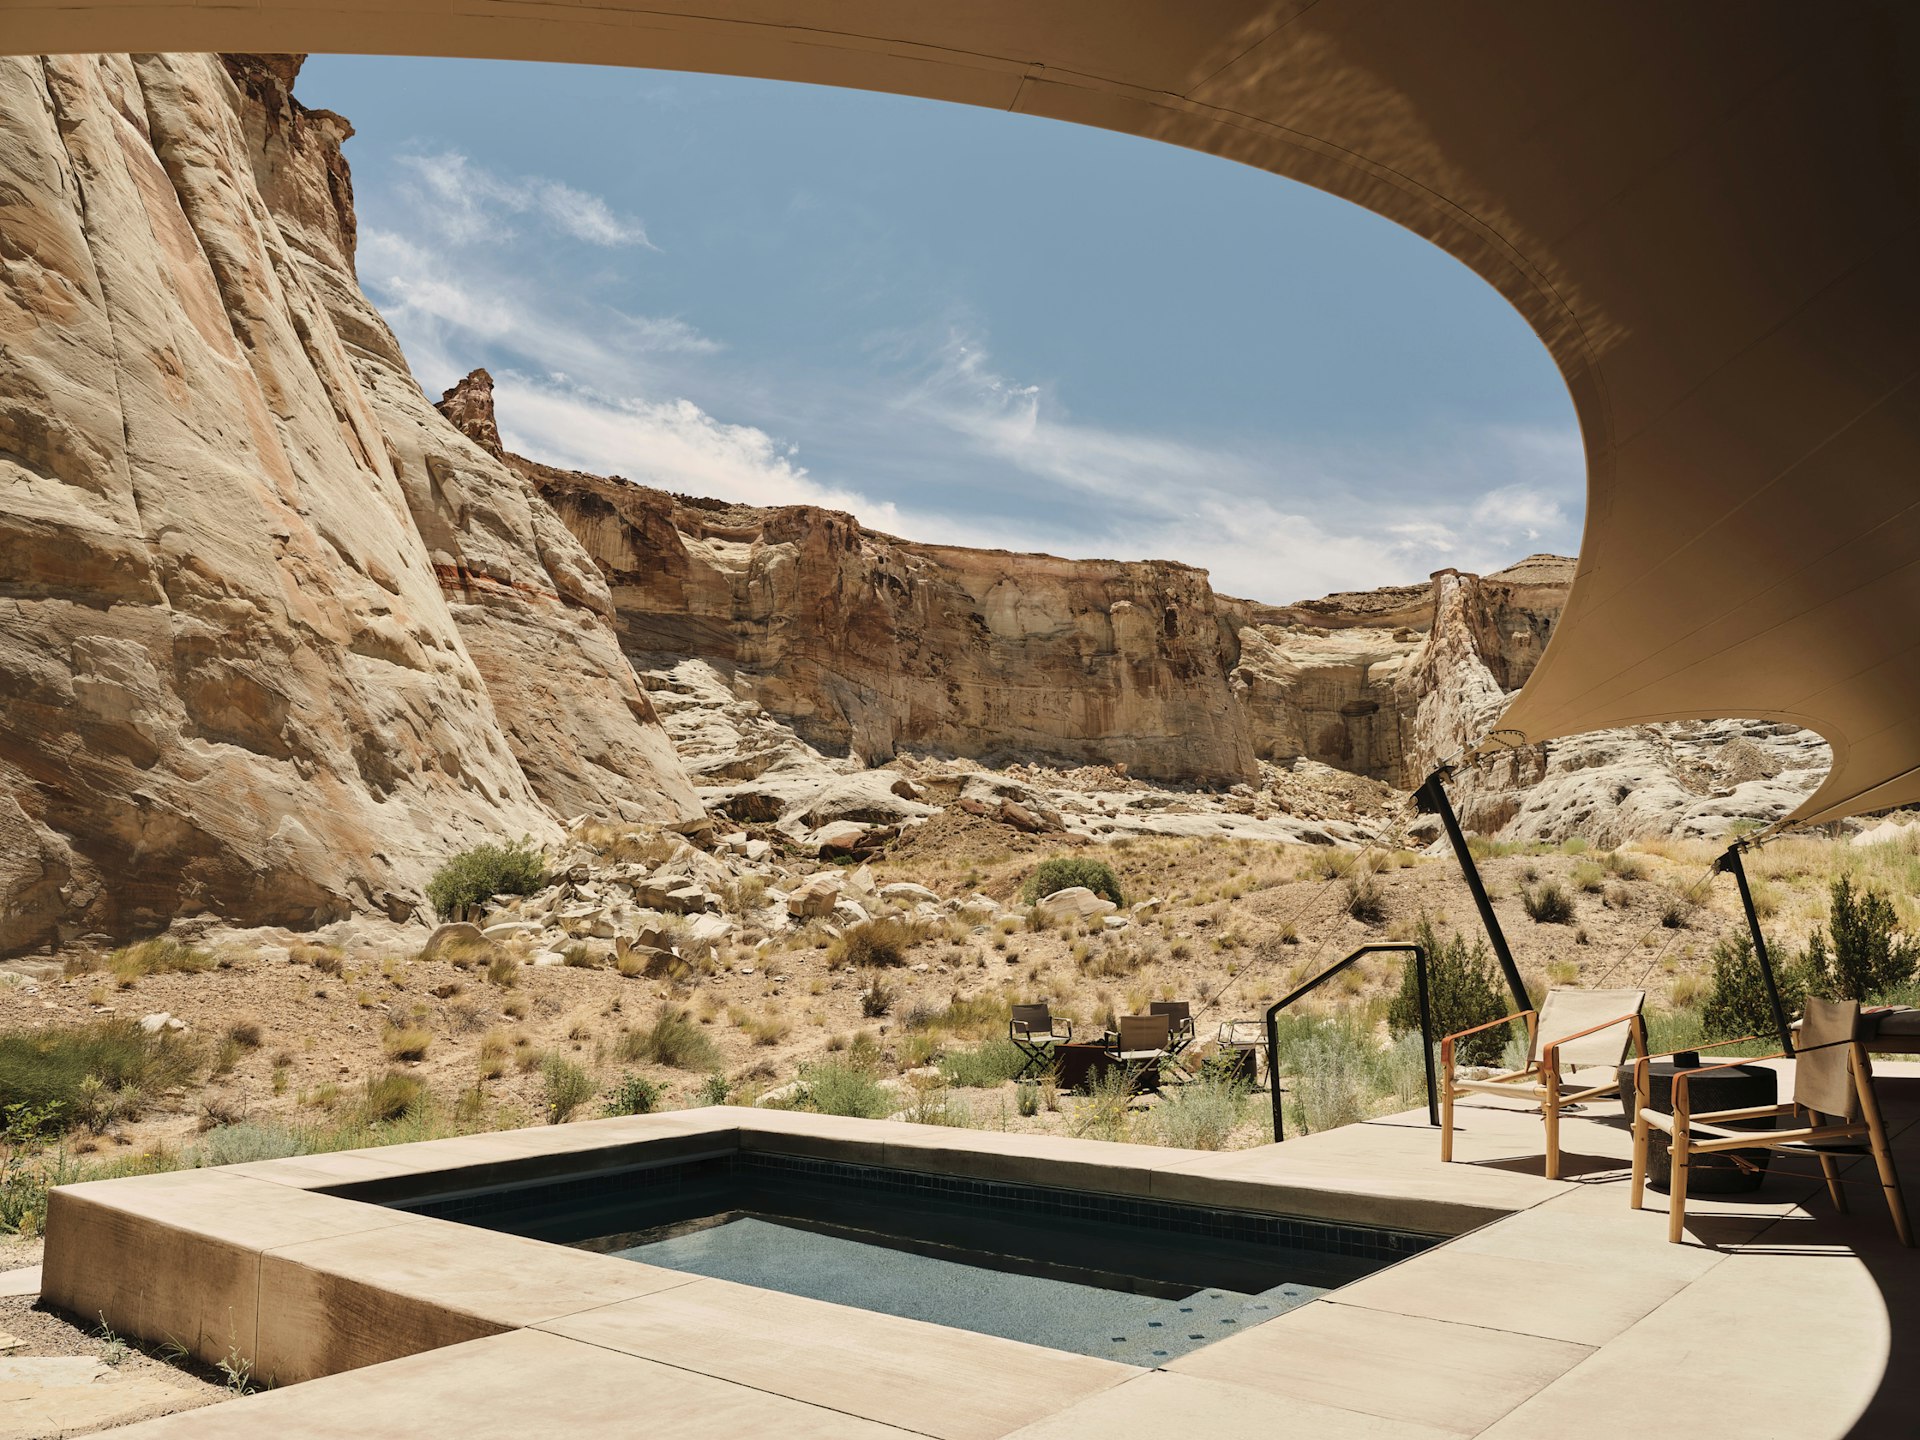 A plunge pool on the edge of rocky desert